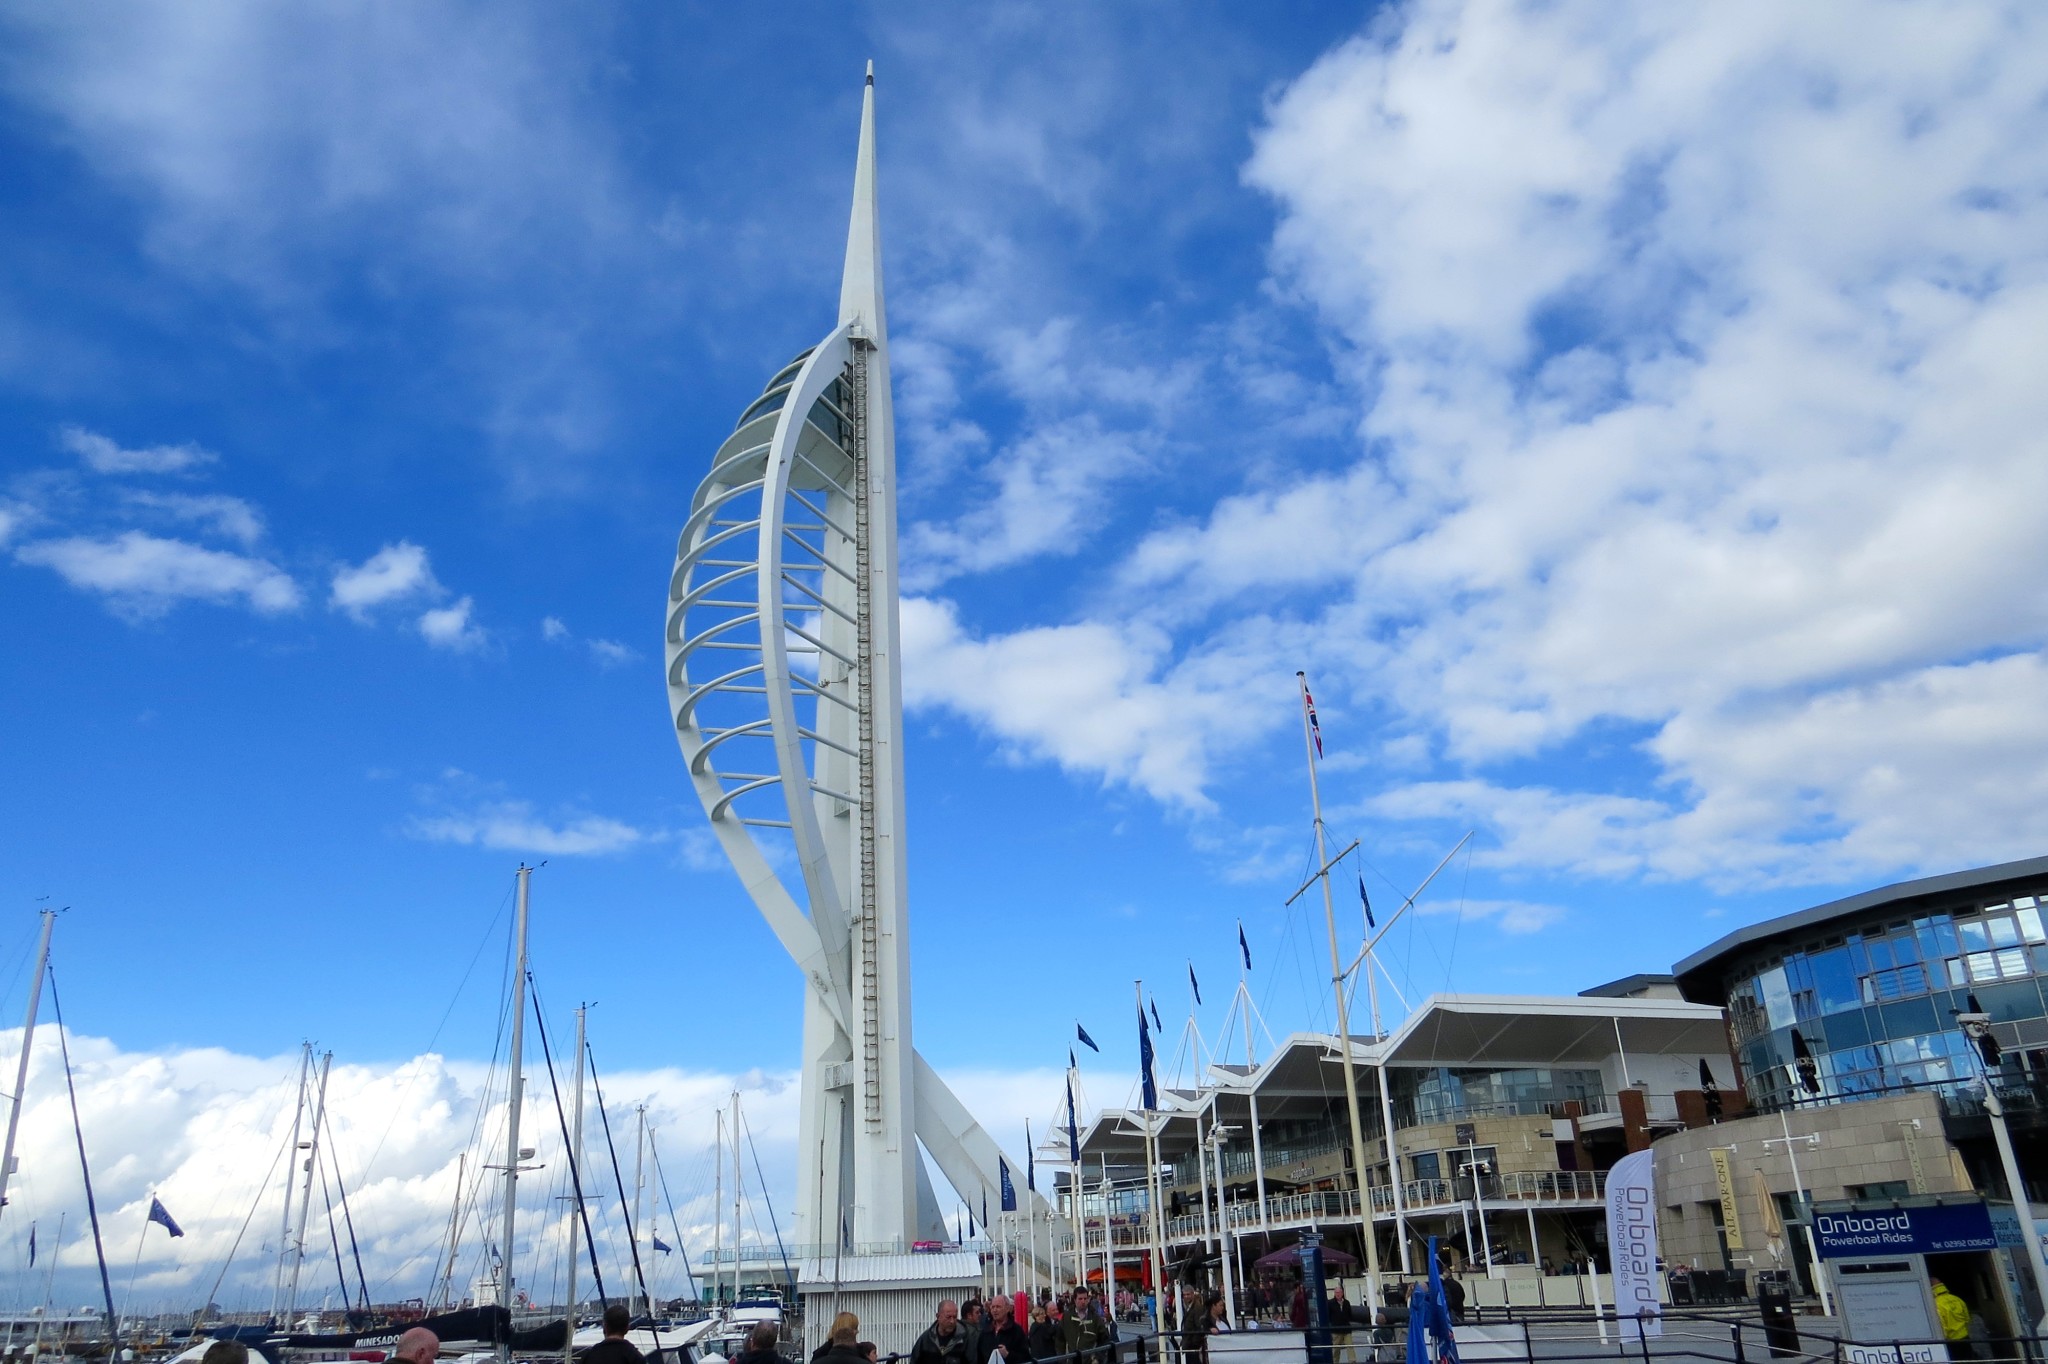 Day Trip to Portsmouth from London